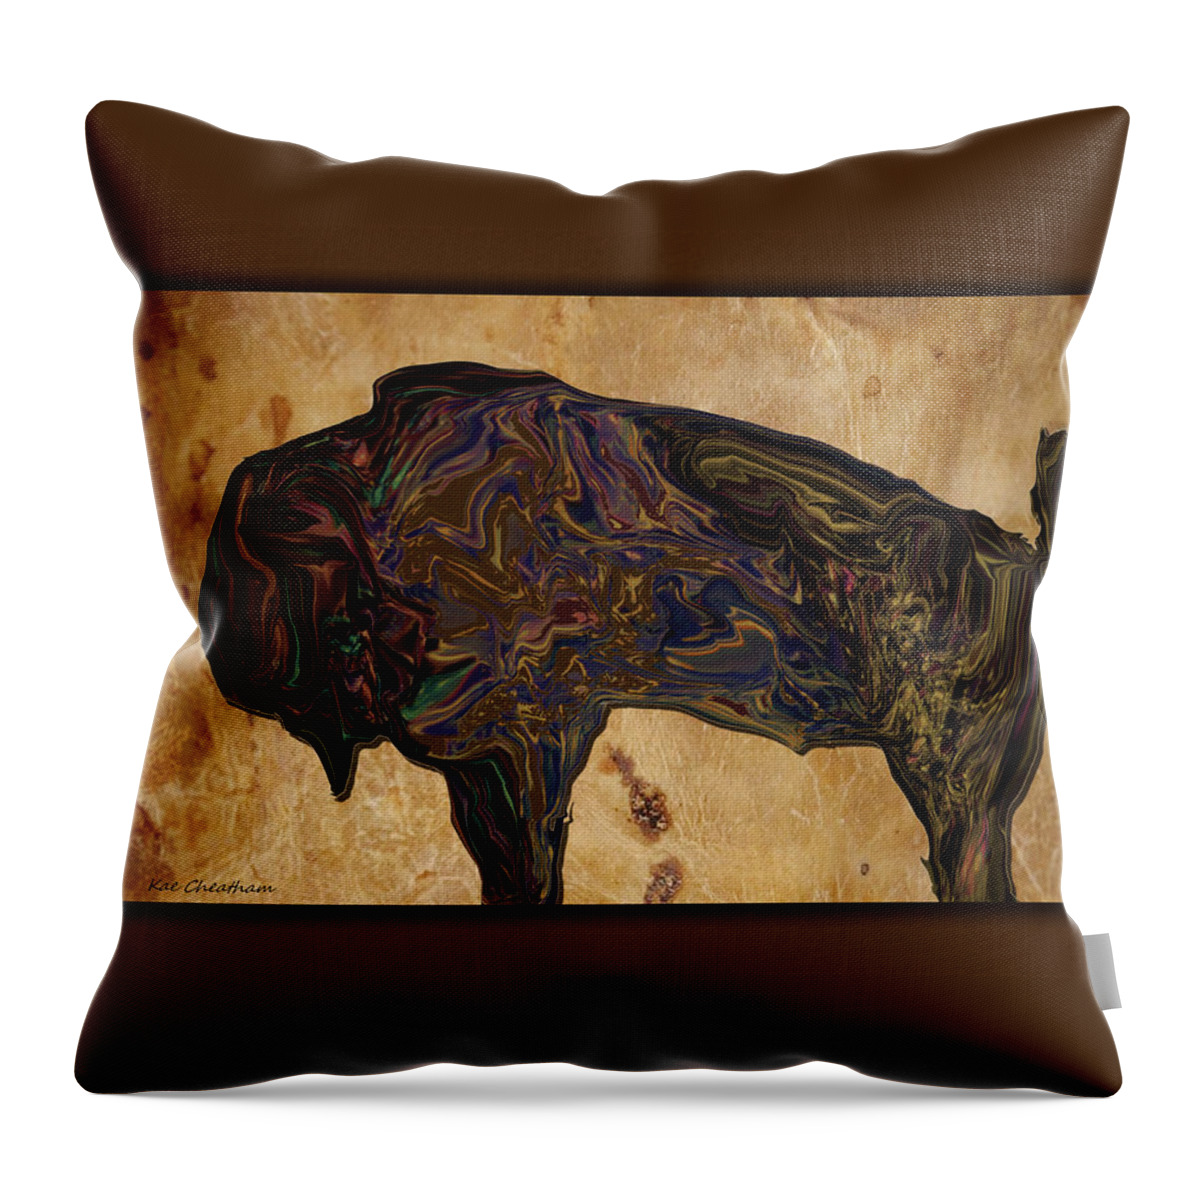 Bison Throw Pillow featuring the digital art Montana Bison by Kae Cheatham